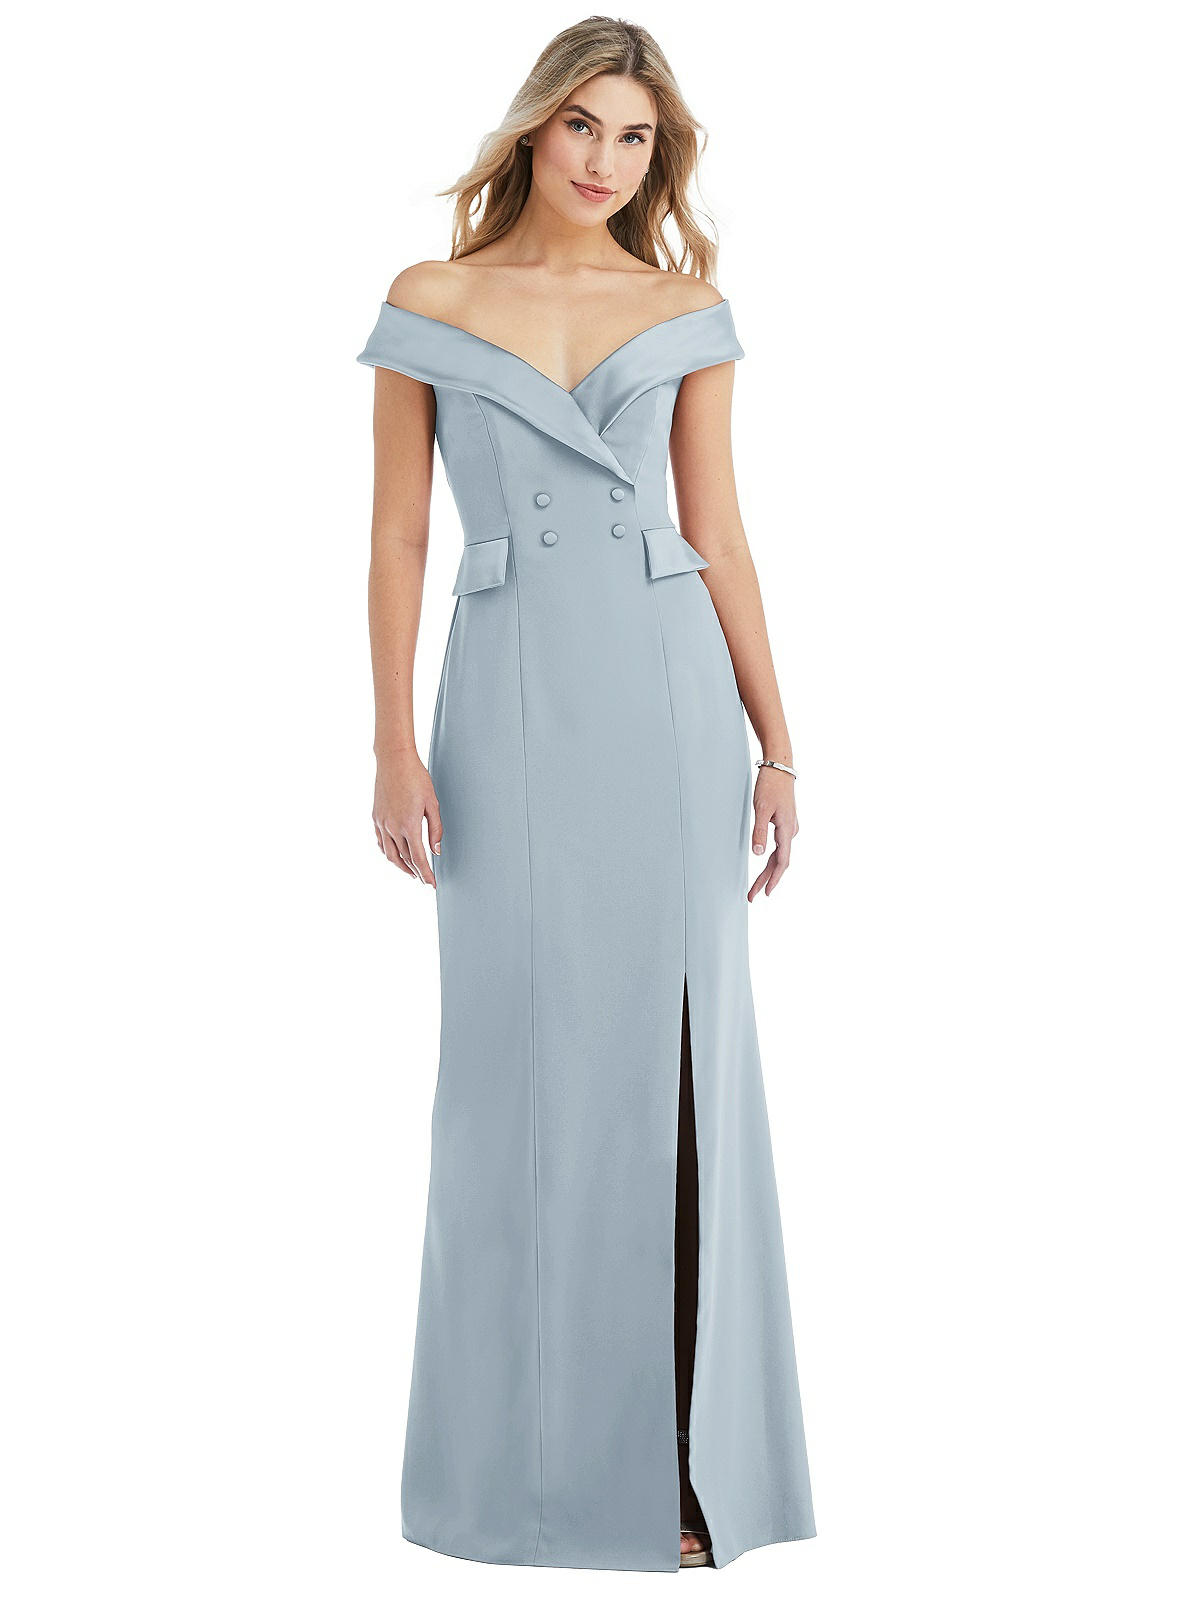 Off-the-Shoulder Tuxedo Maxi Dress with Front Slit | The Dessy Group